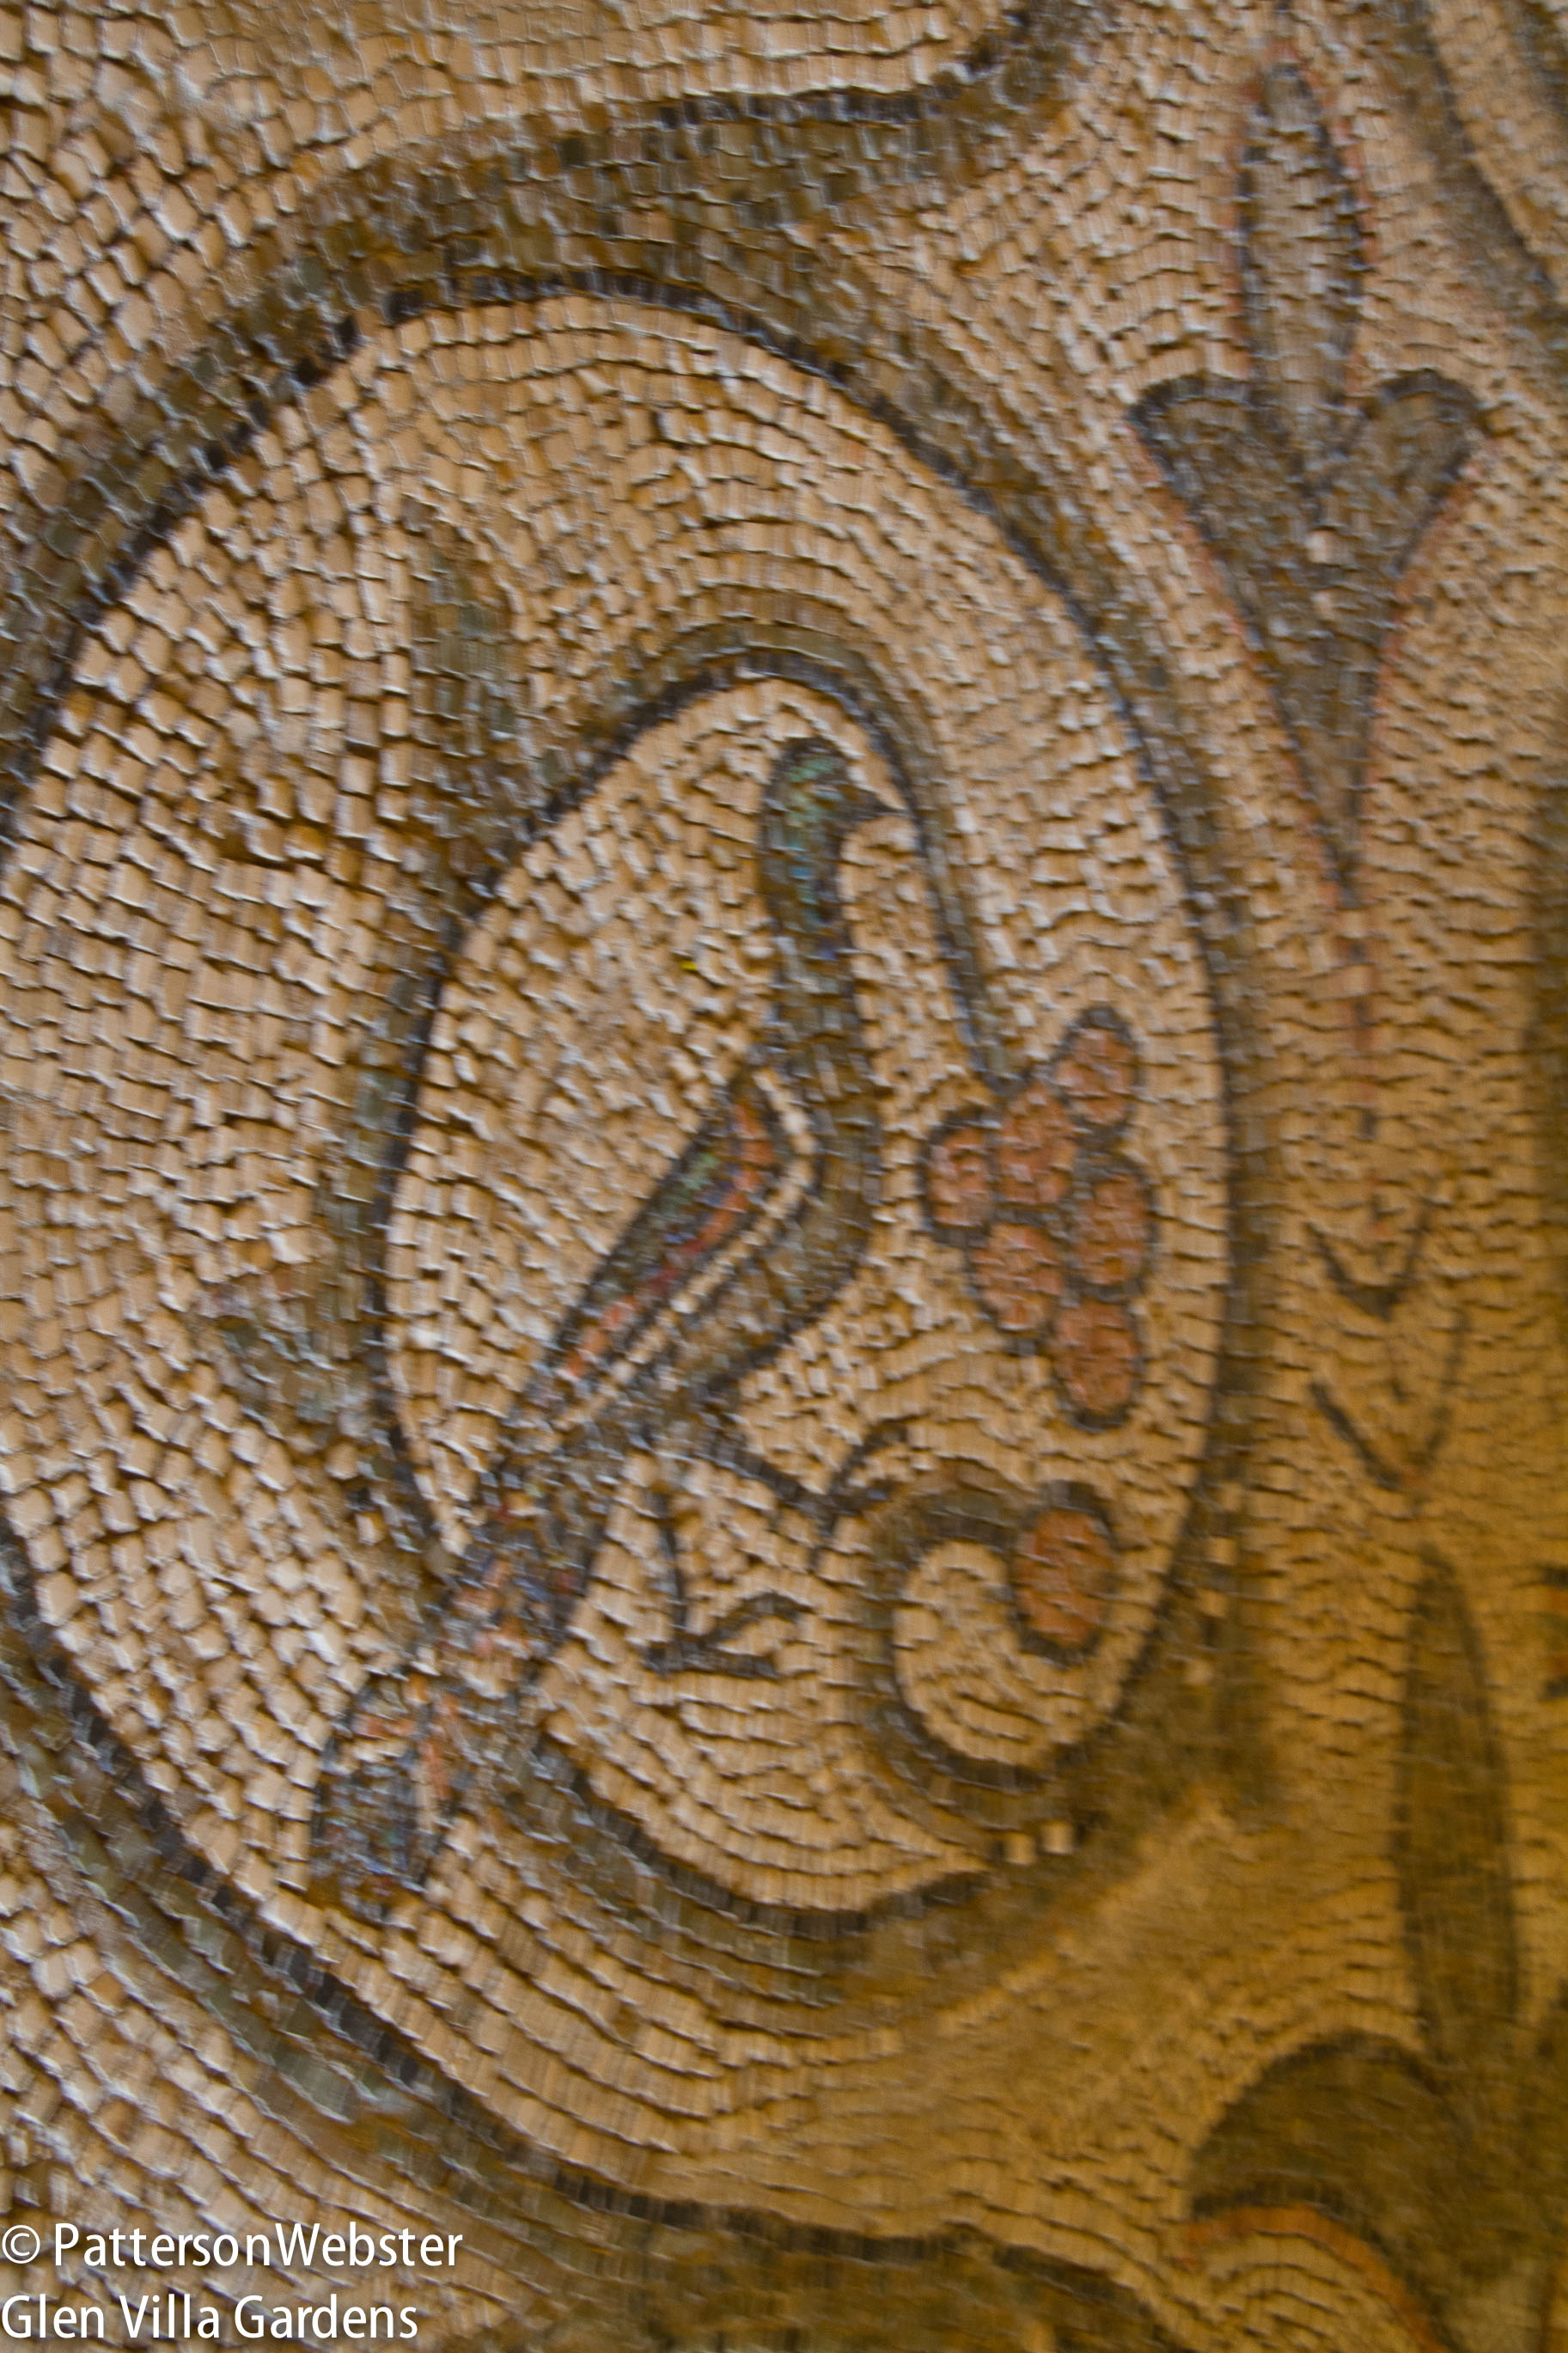 A dove perches on a branch in a floor mosaic in the basilica of San Vitale.